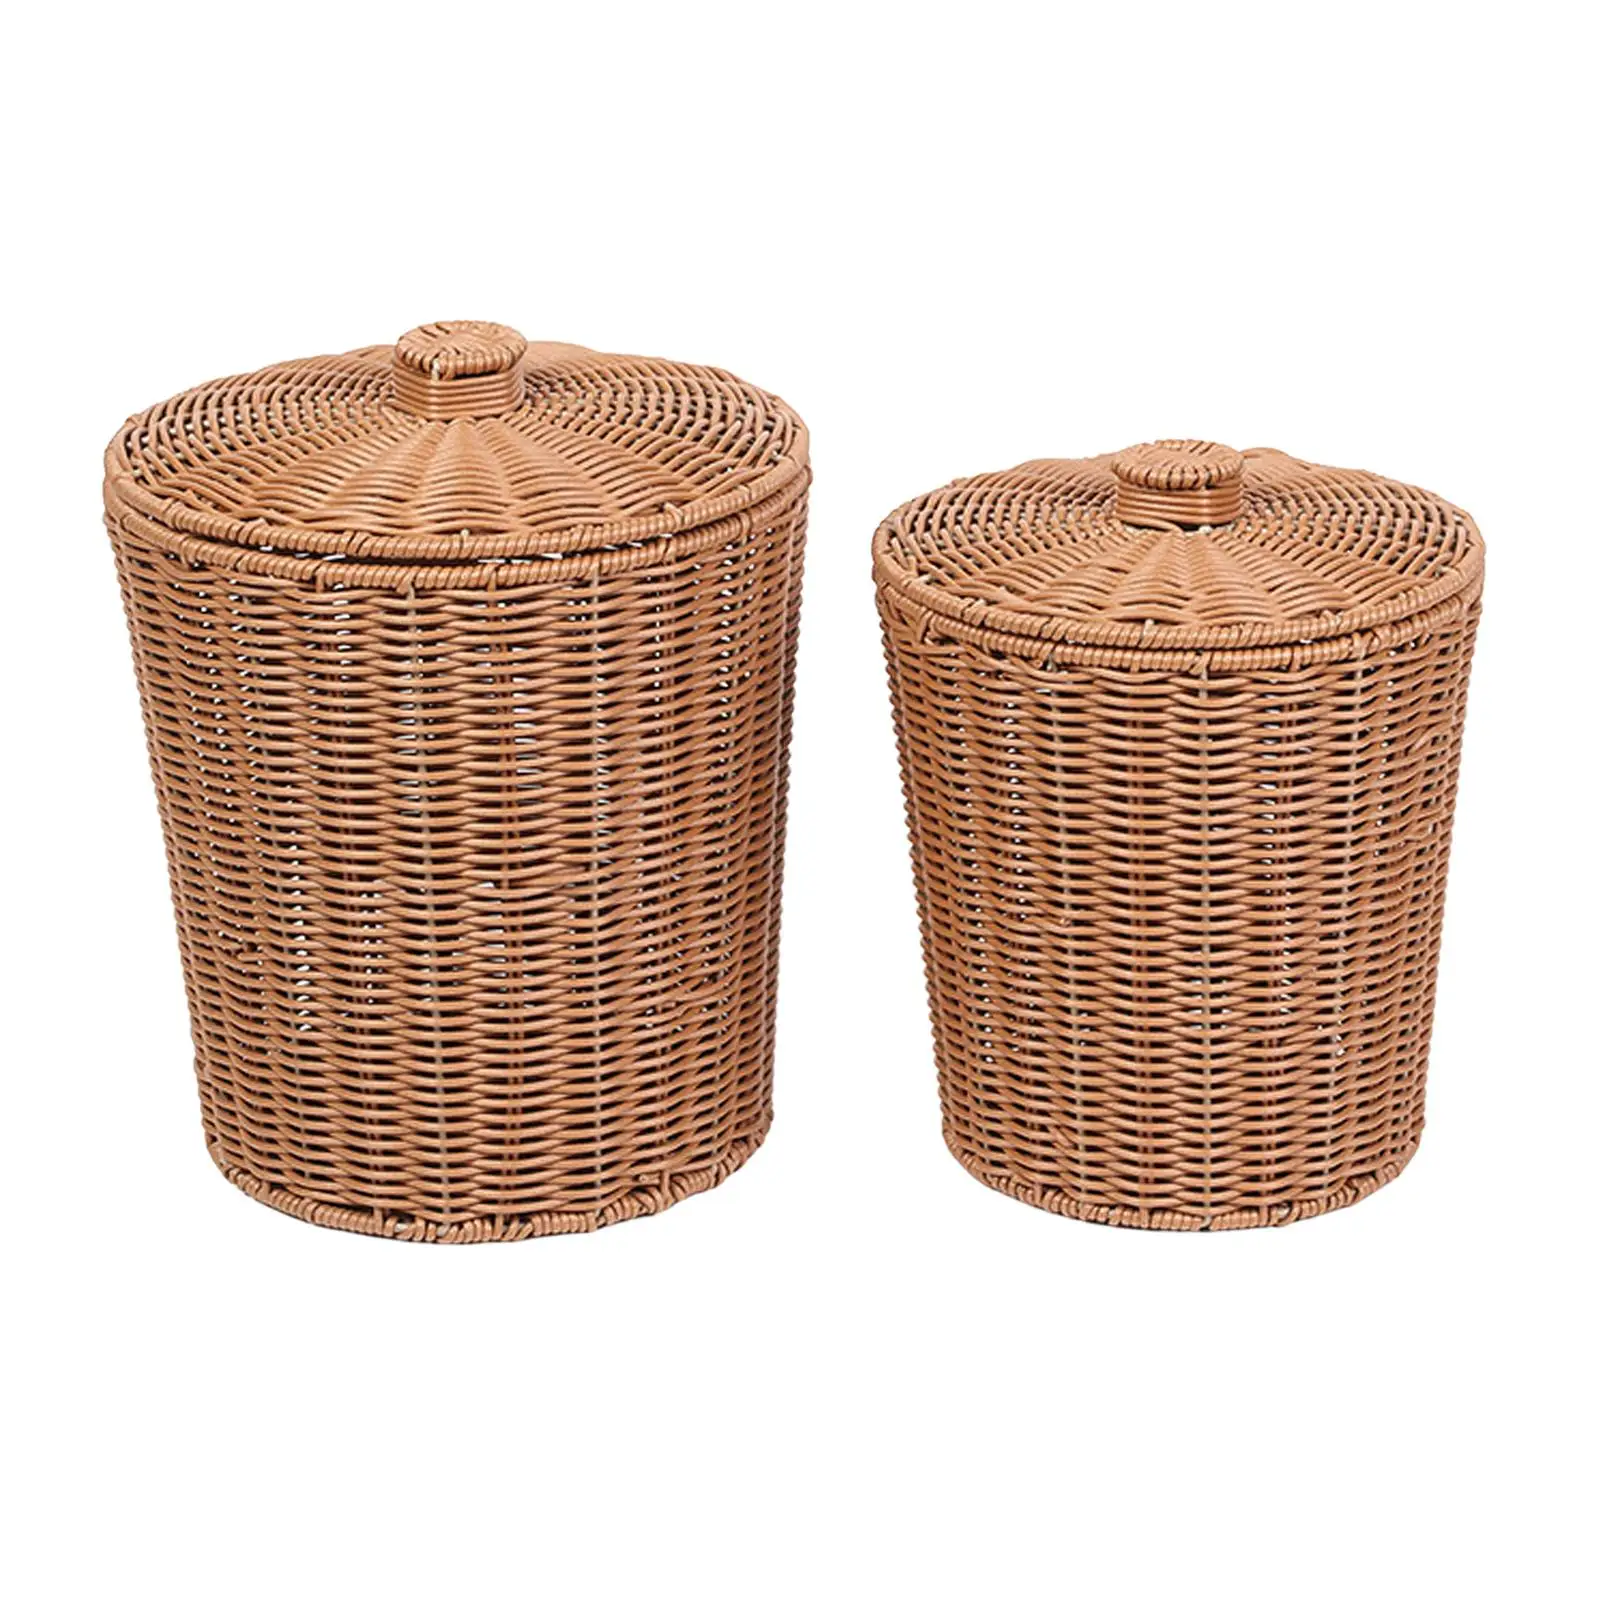 Wicker Waste Basket Handwoven for Home Decorative Living Room Fruit Tray